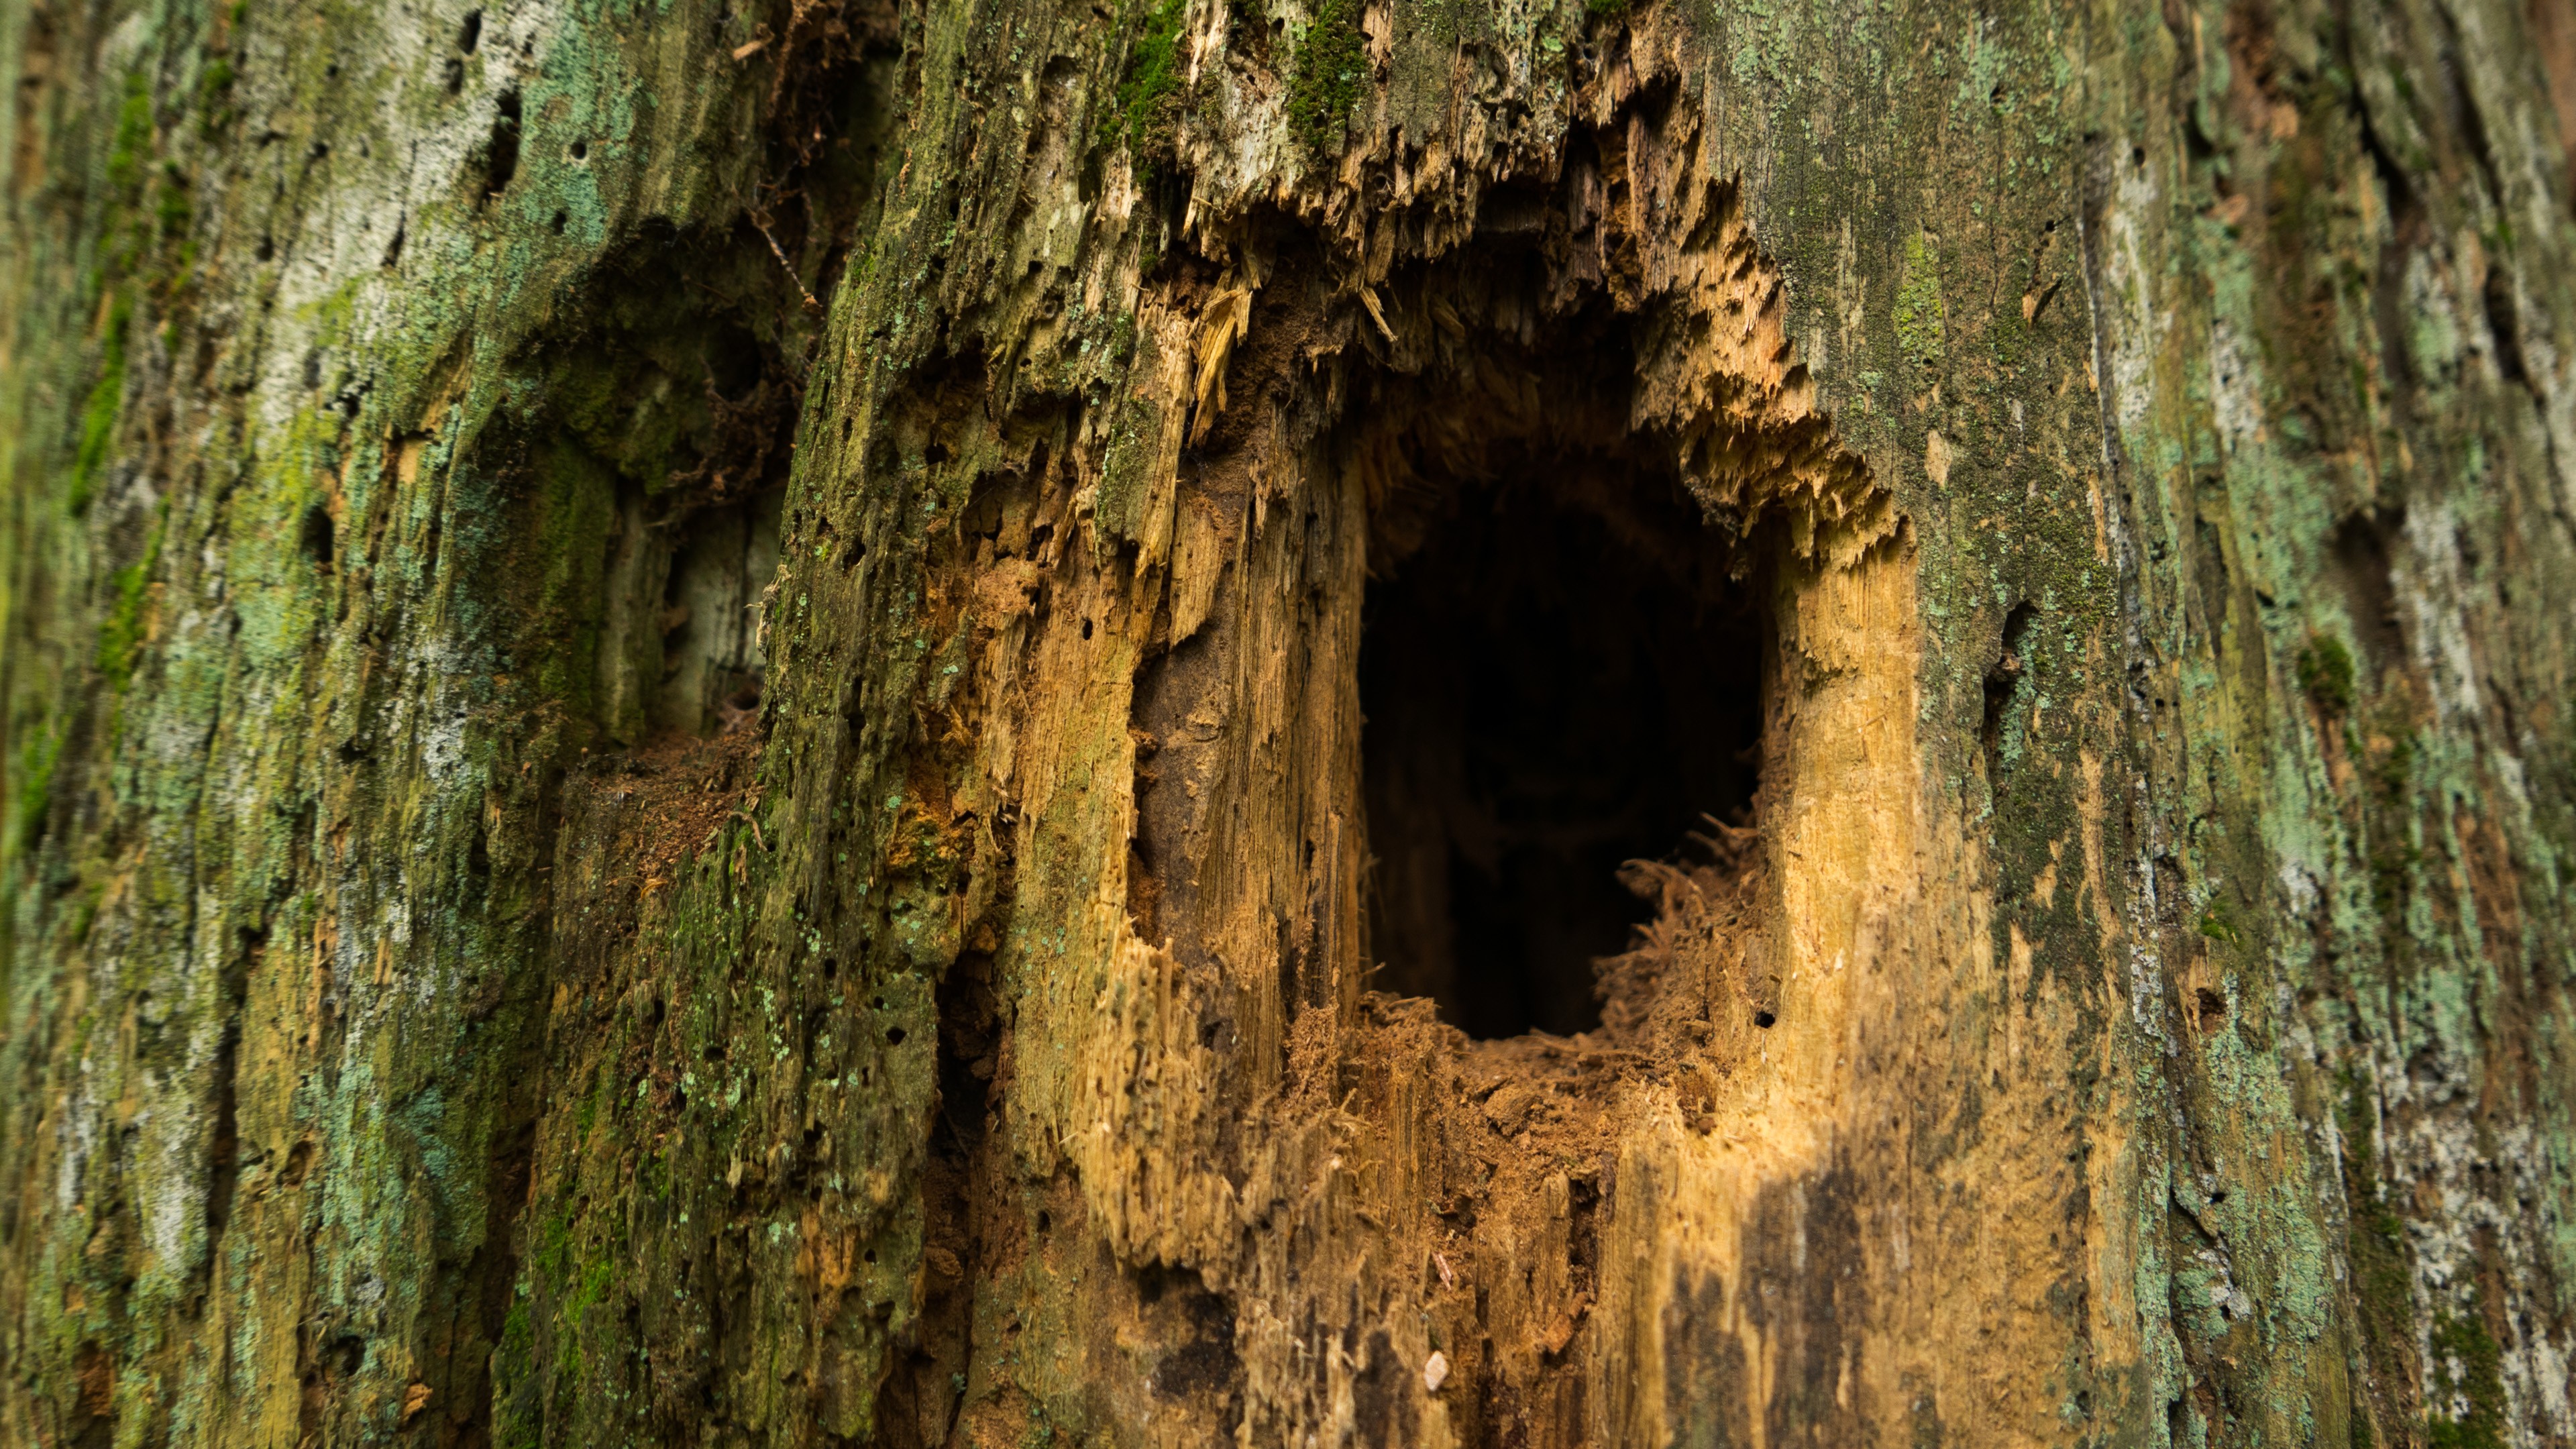 Hollow Dead Trees Depth Of Field Nature Photography Wood Closeup 4K 3840x2160